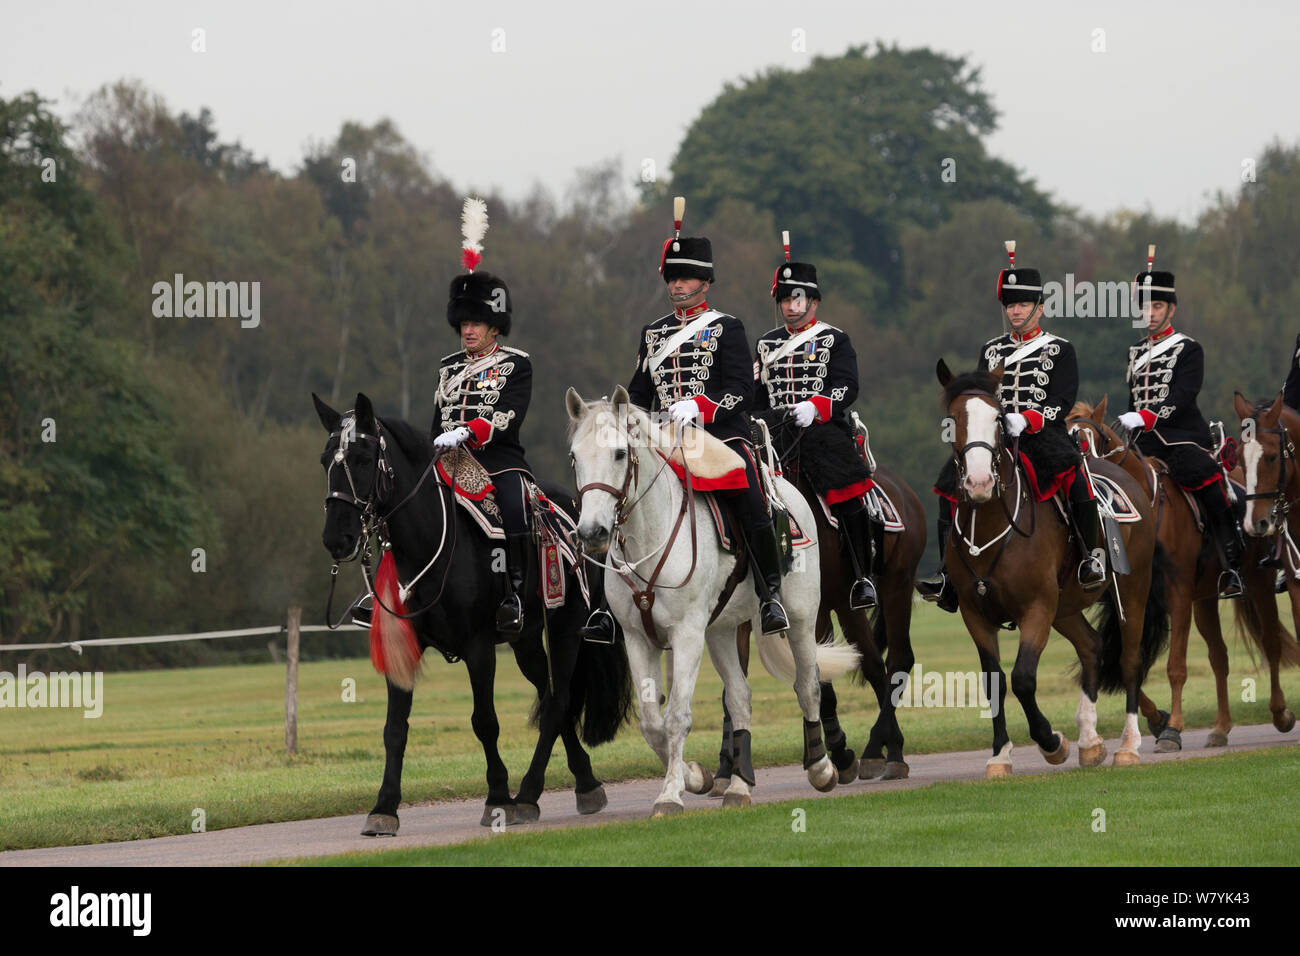 The Honourable Artillery Company, the second oldest military organisation in the world, parades for its annual review at Guards Polo Club, Smith Lawn, in Windsor Great Park, United Kingdom. October 2014. Stock Photo